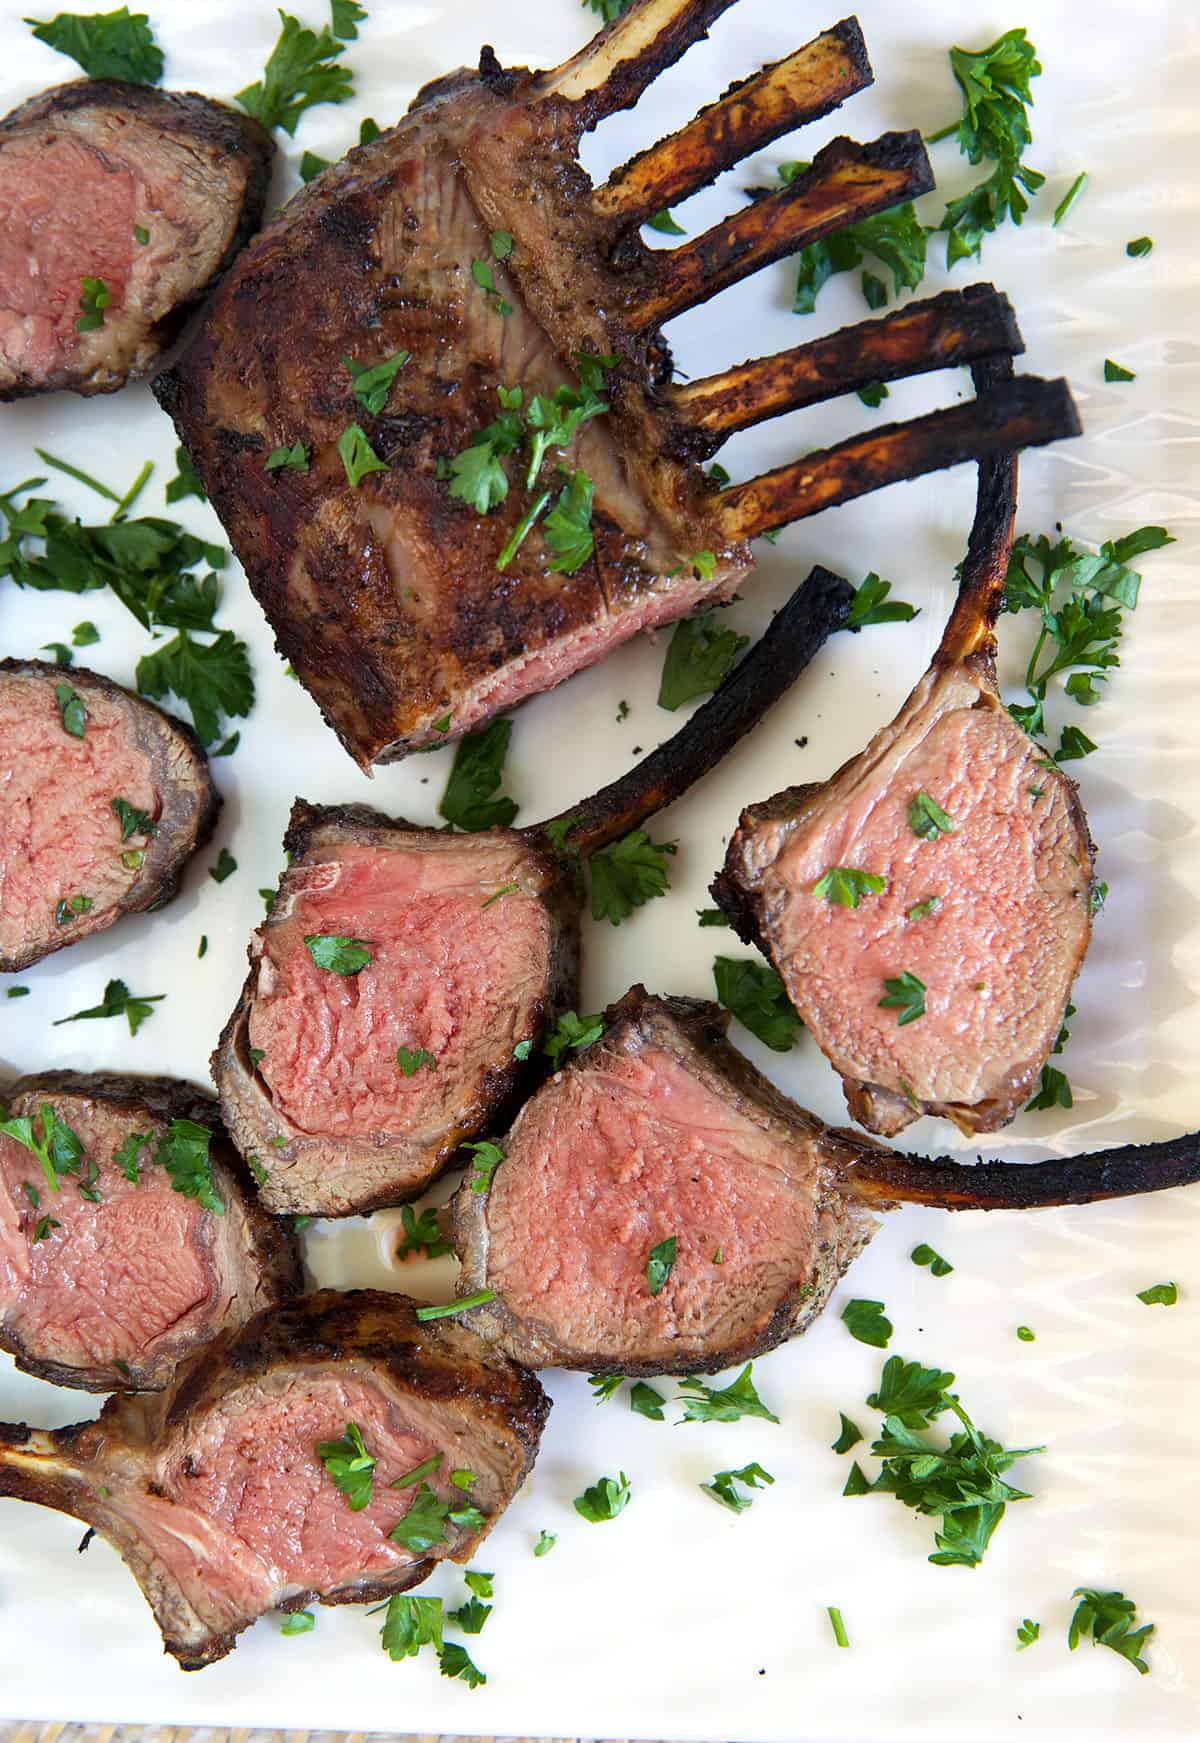 Several slices of grilled lamb are presented on a white surface next to the whole rack.